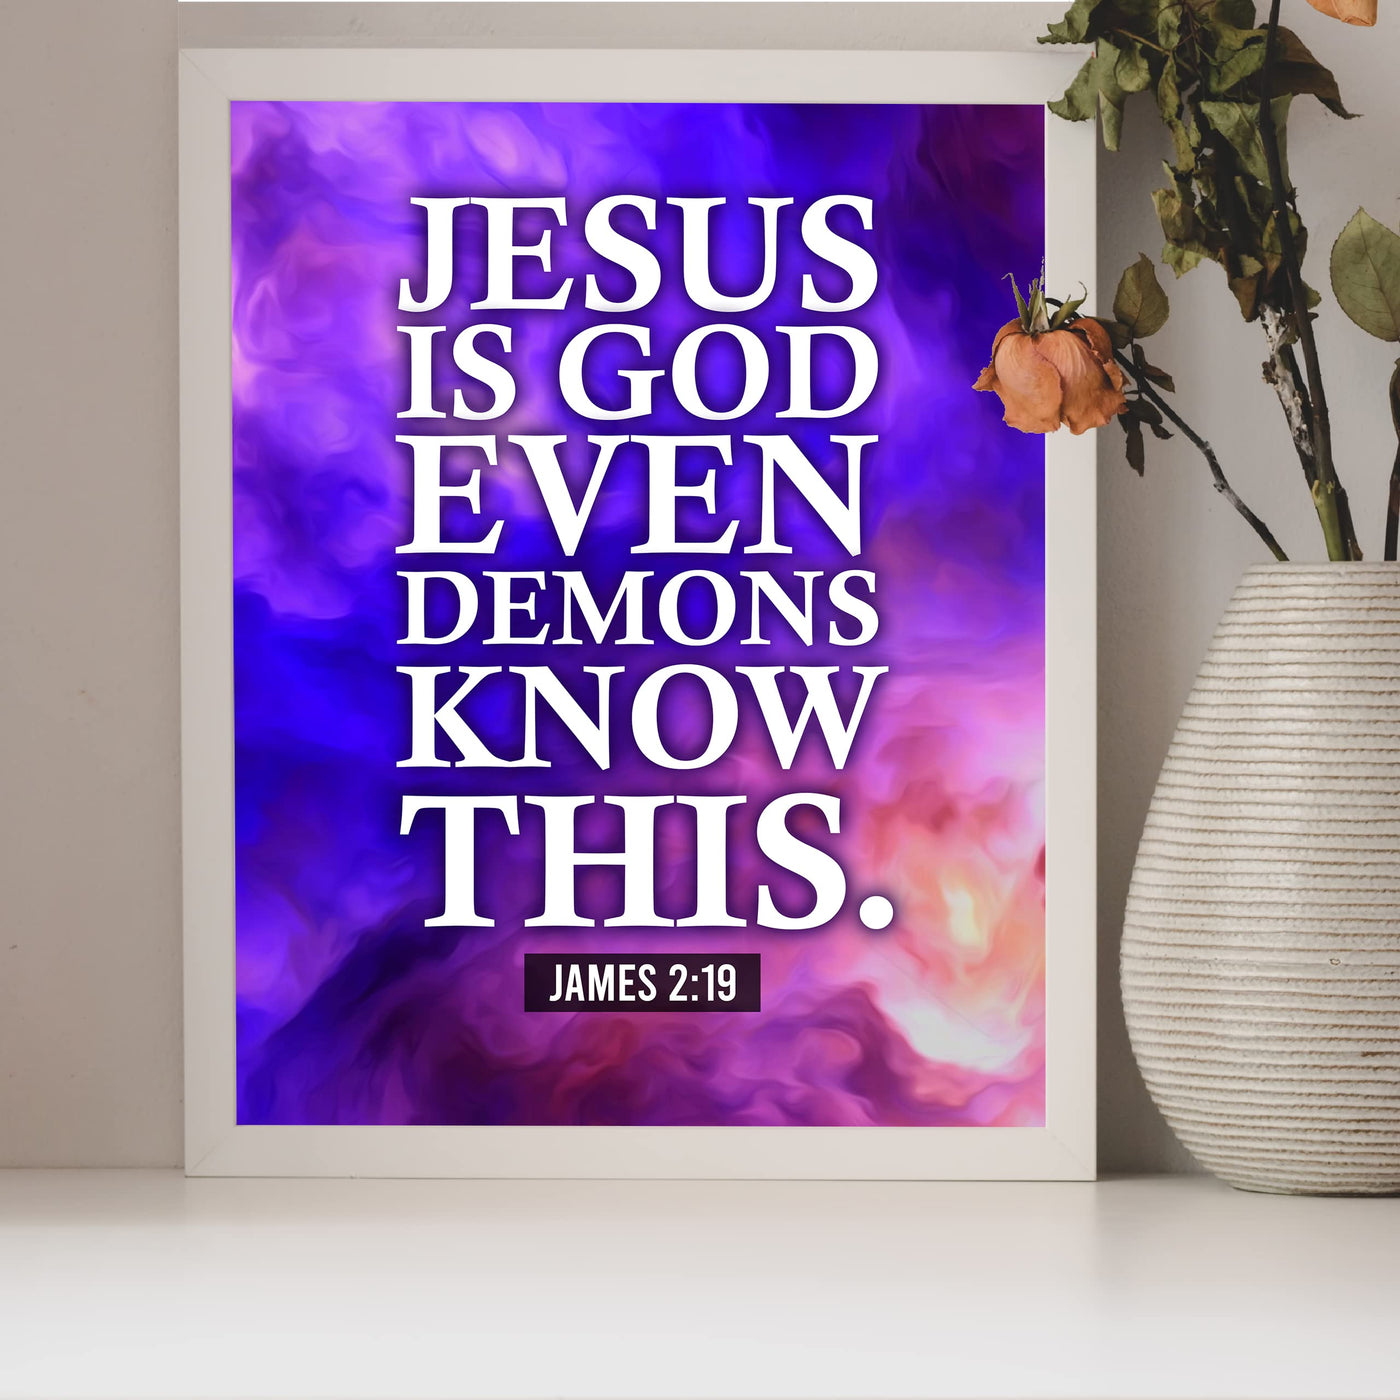 Jesus Is God-Even Demons Know This- Motivational Christian Wall Decor -8 x 10" Typographic Abstract Art Print-Ready to Frame. Religious Home-Office-Church-School Decor. Great Inspirational Gift!